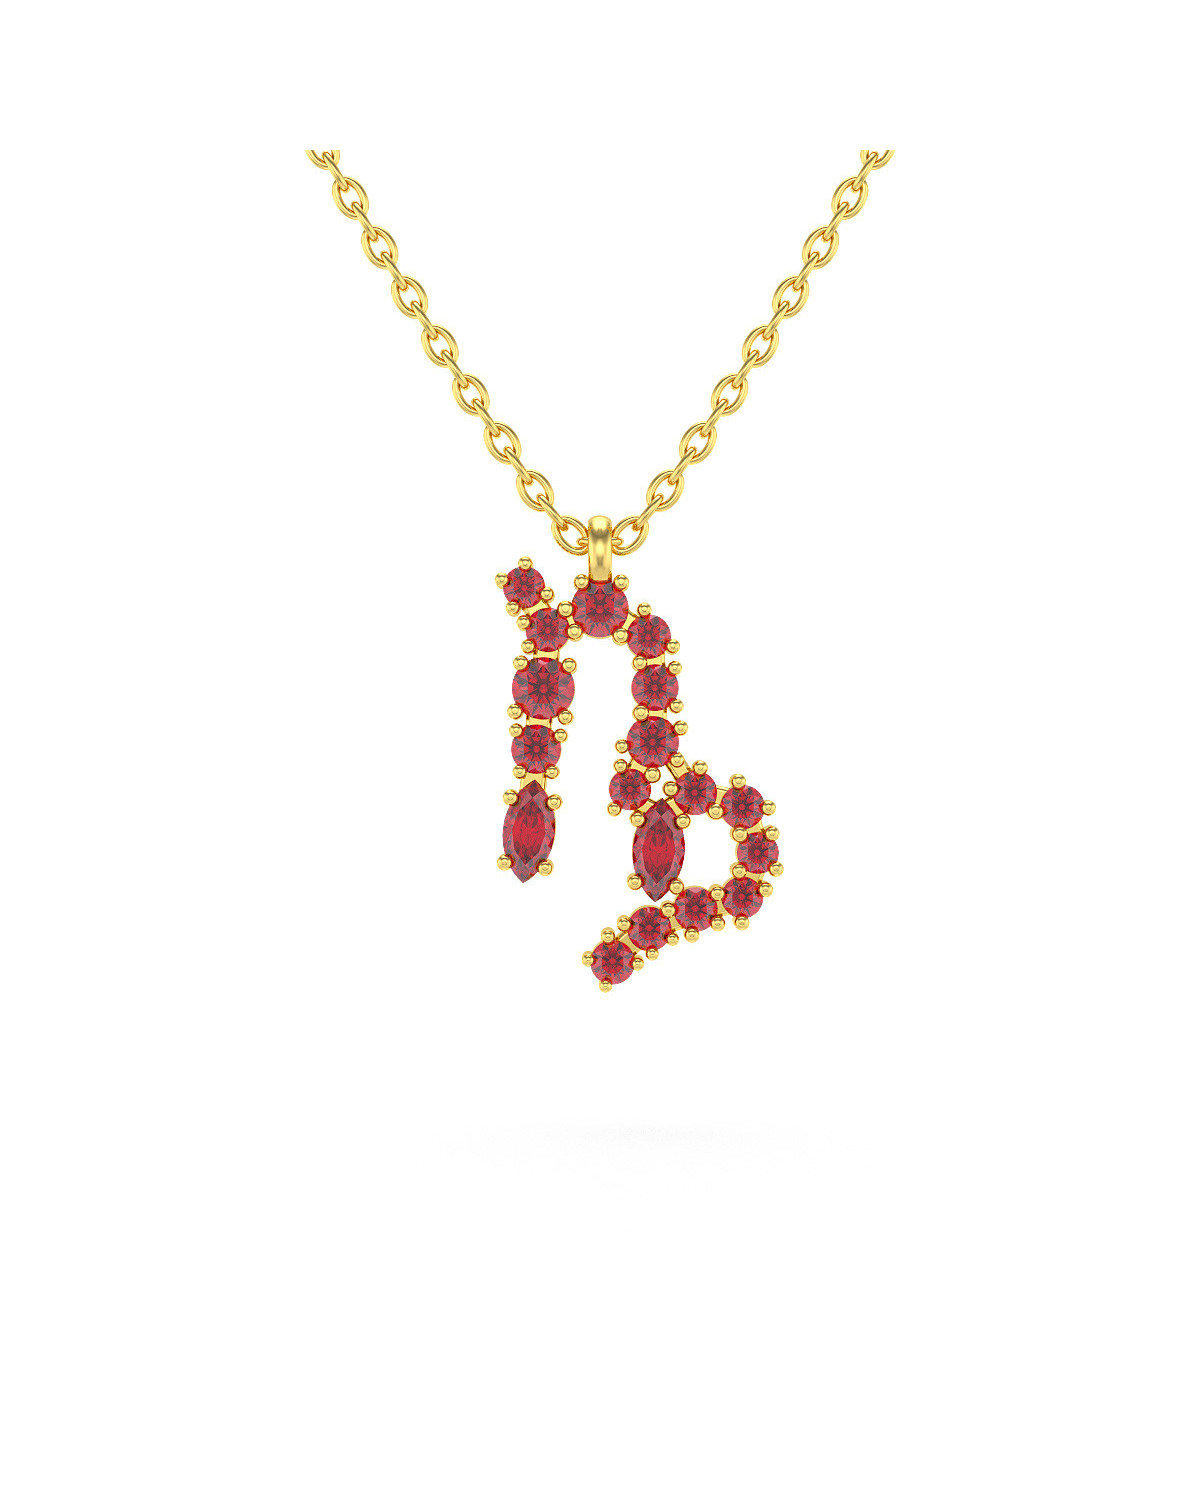 14K Gold Ruby Necklace Pendant Gold Chain included